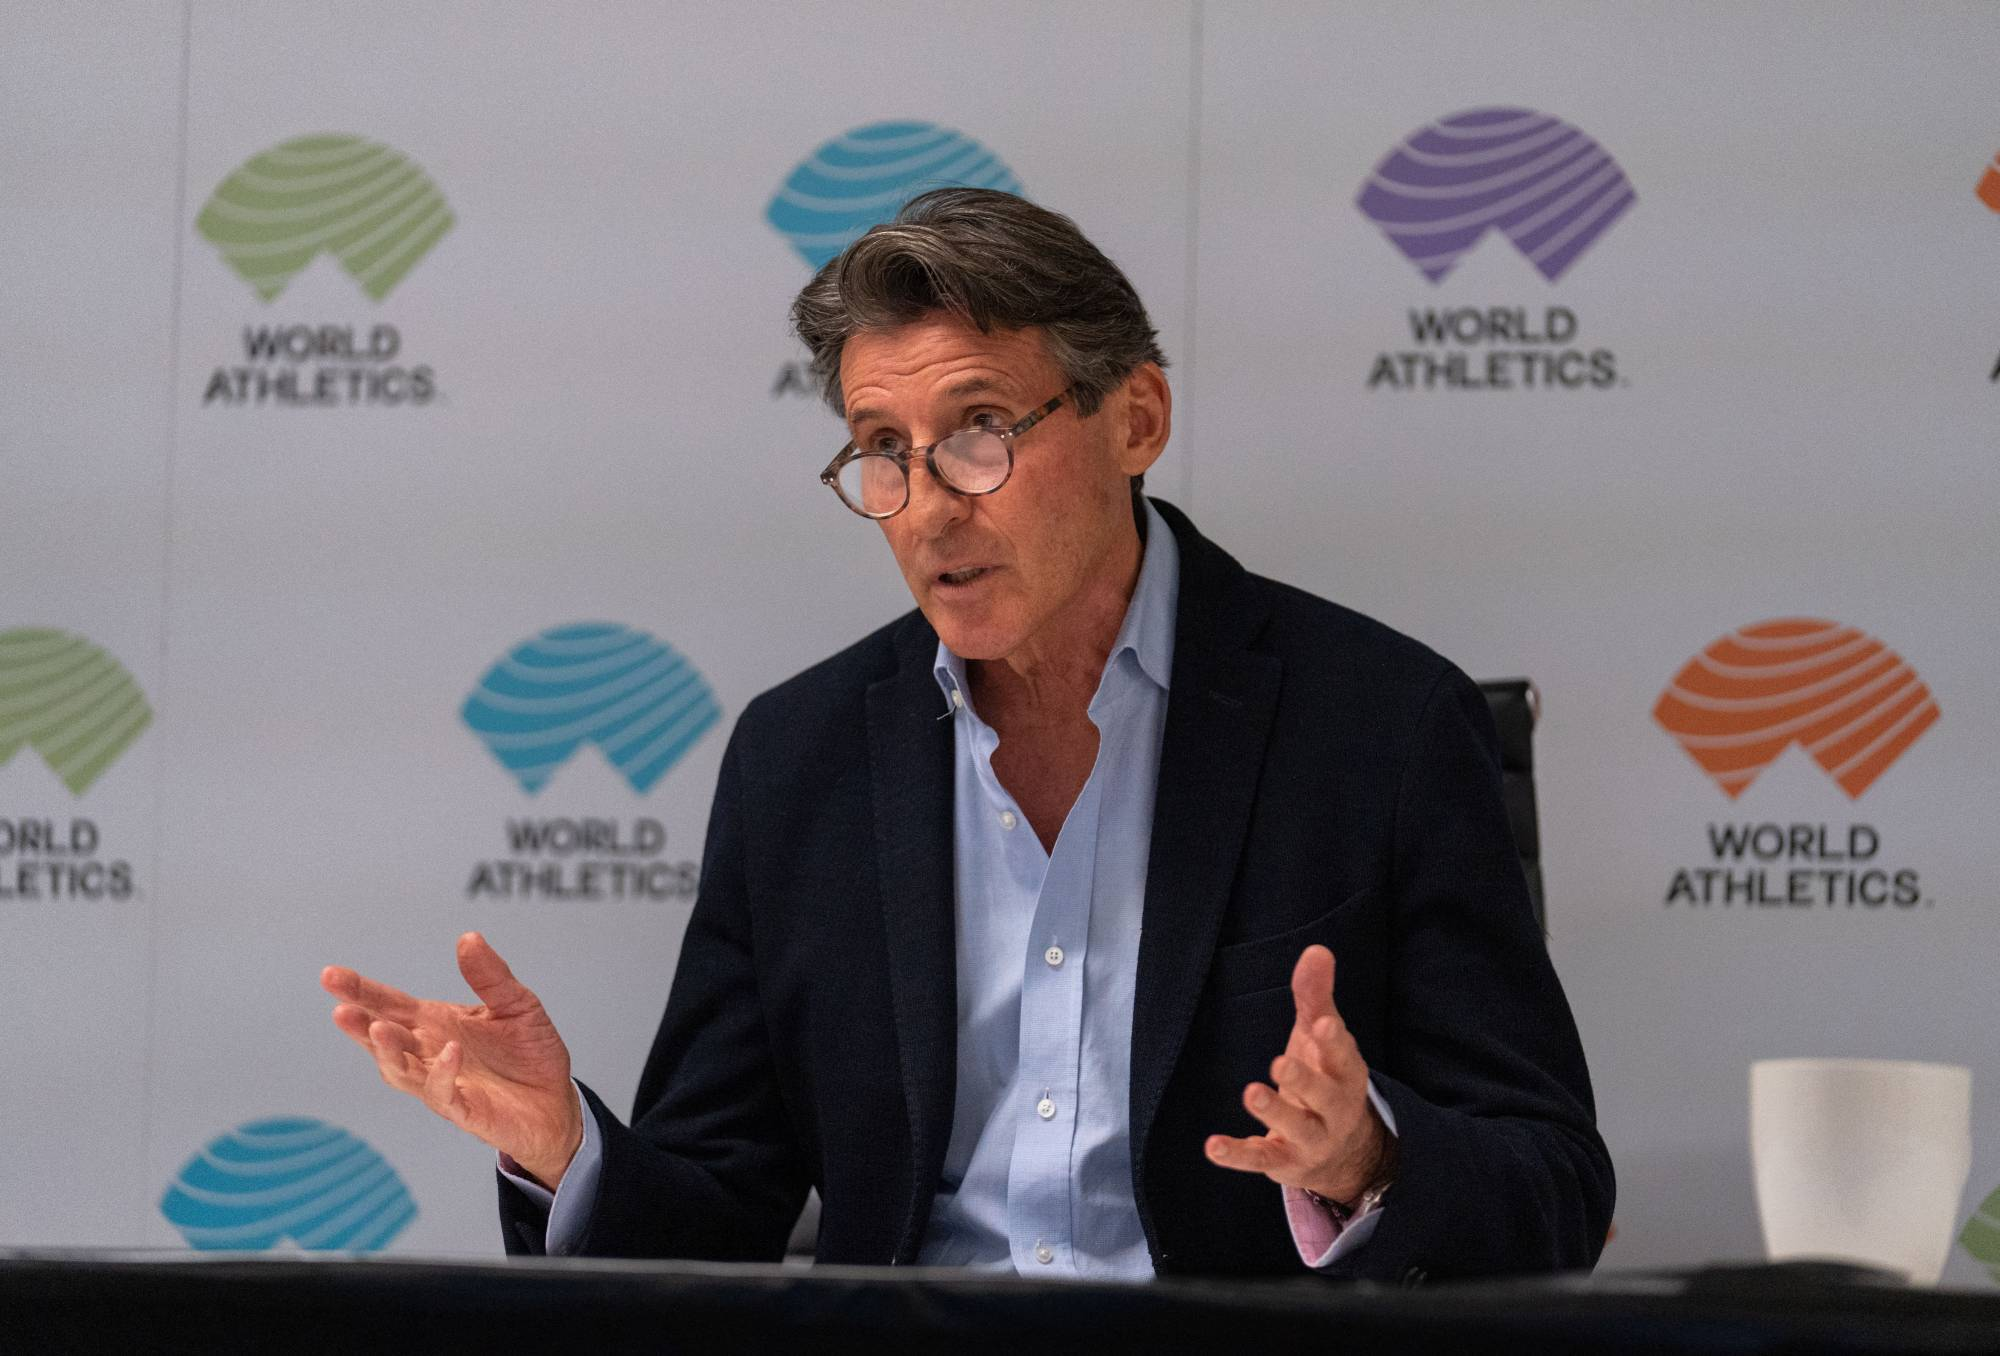 World Athletics President Sebastian Coe announcing that male-to-female transgender athletes who have been through male puberty would be excluded from female World Rankings competition from March 31 ©World Athletics